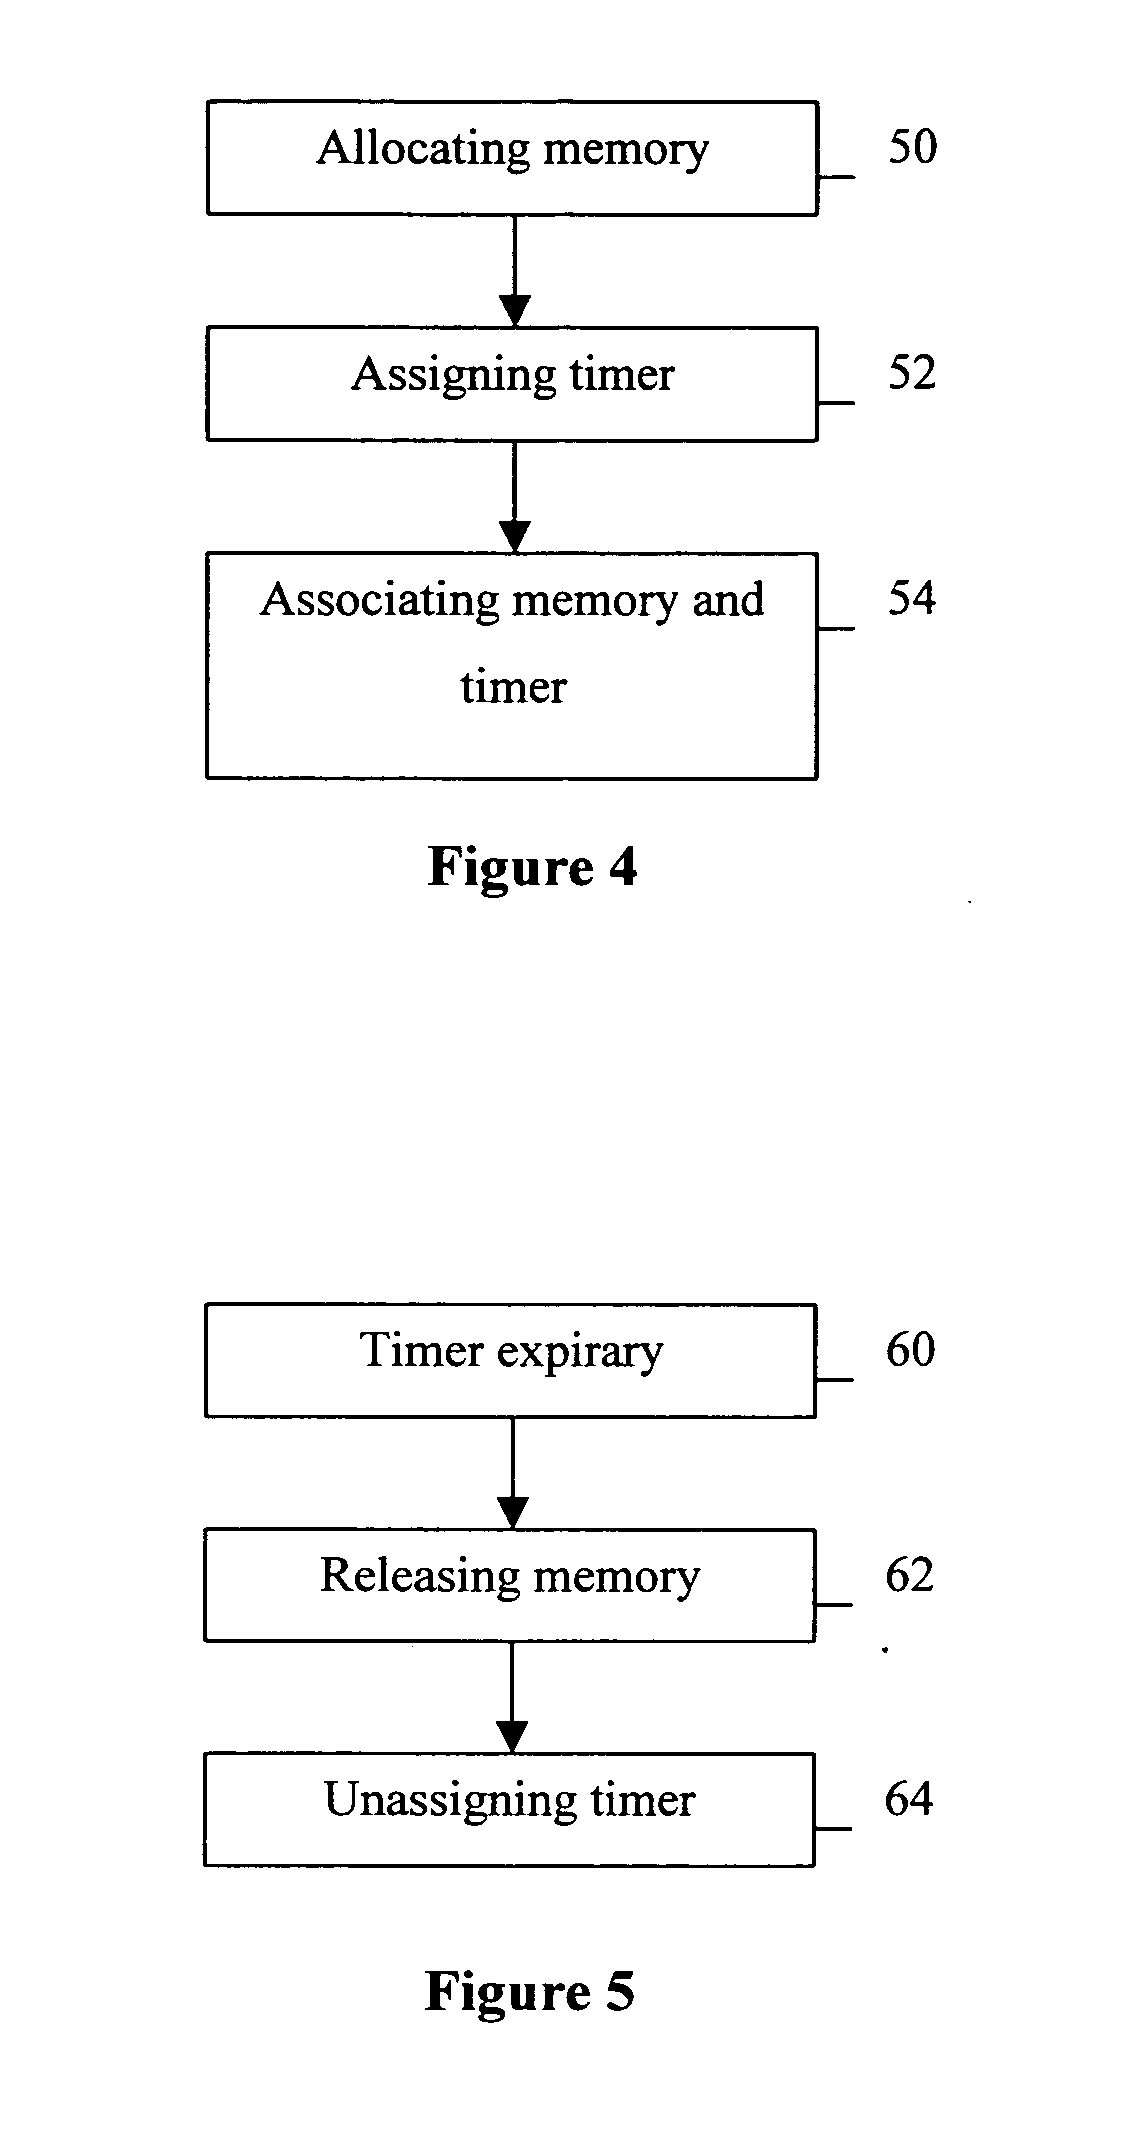 Memory management for a data processing system